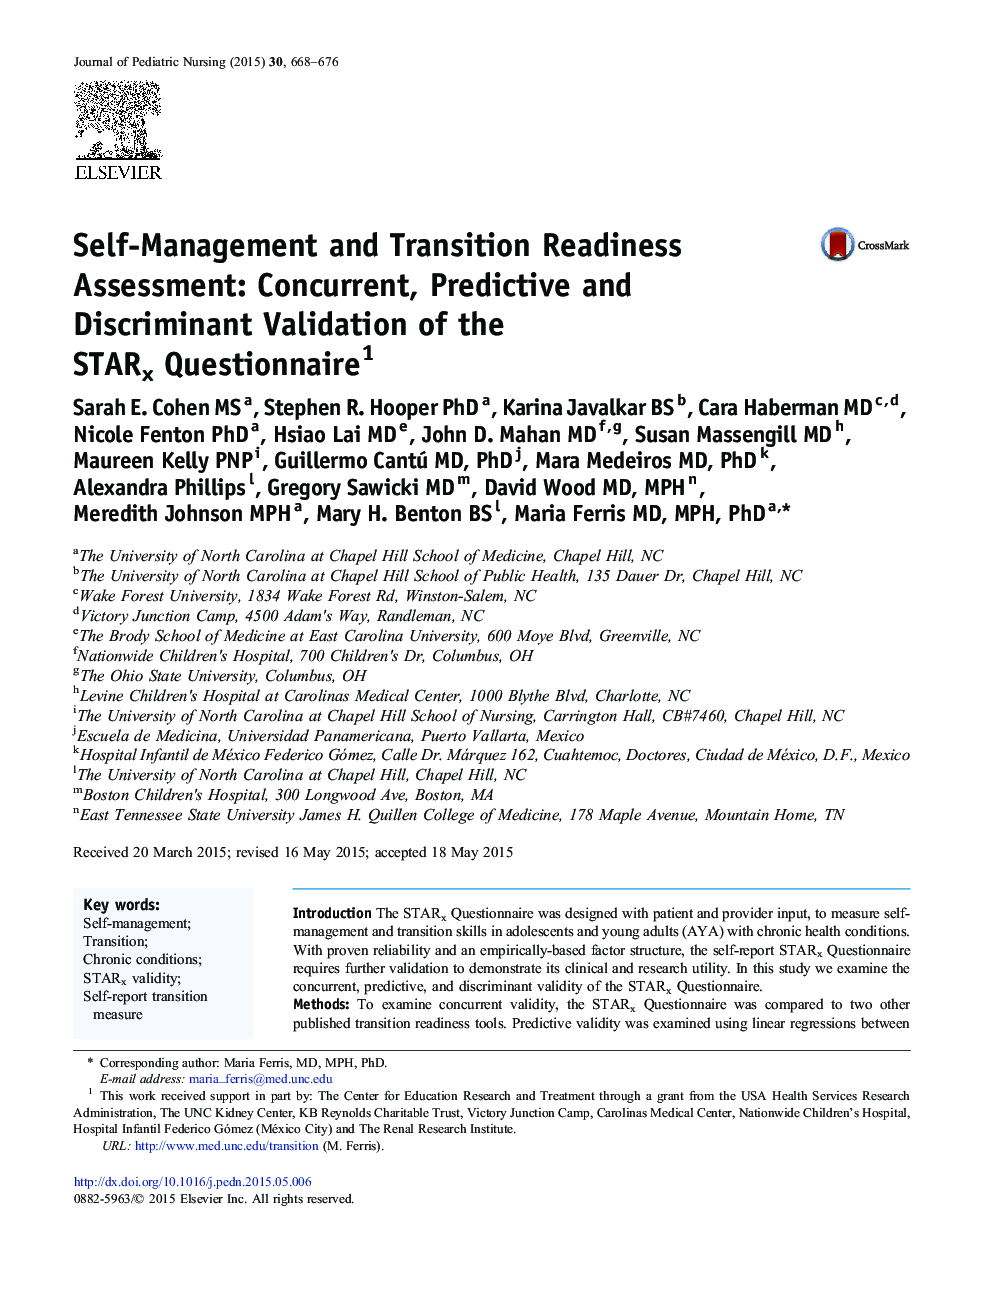 Self-Management and Transition Readiness Assessment: Concurrent, Predictive and Discriminant Validation of the STARx Questionnaire 1